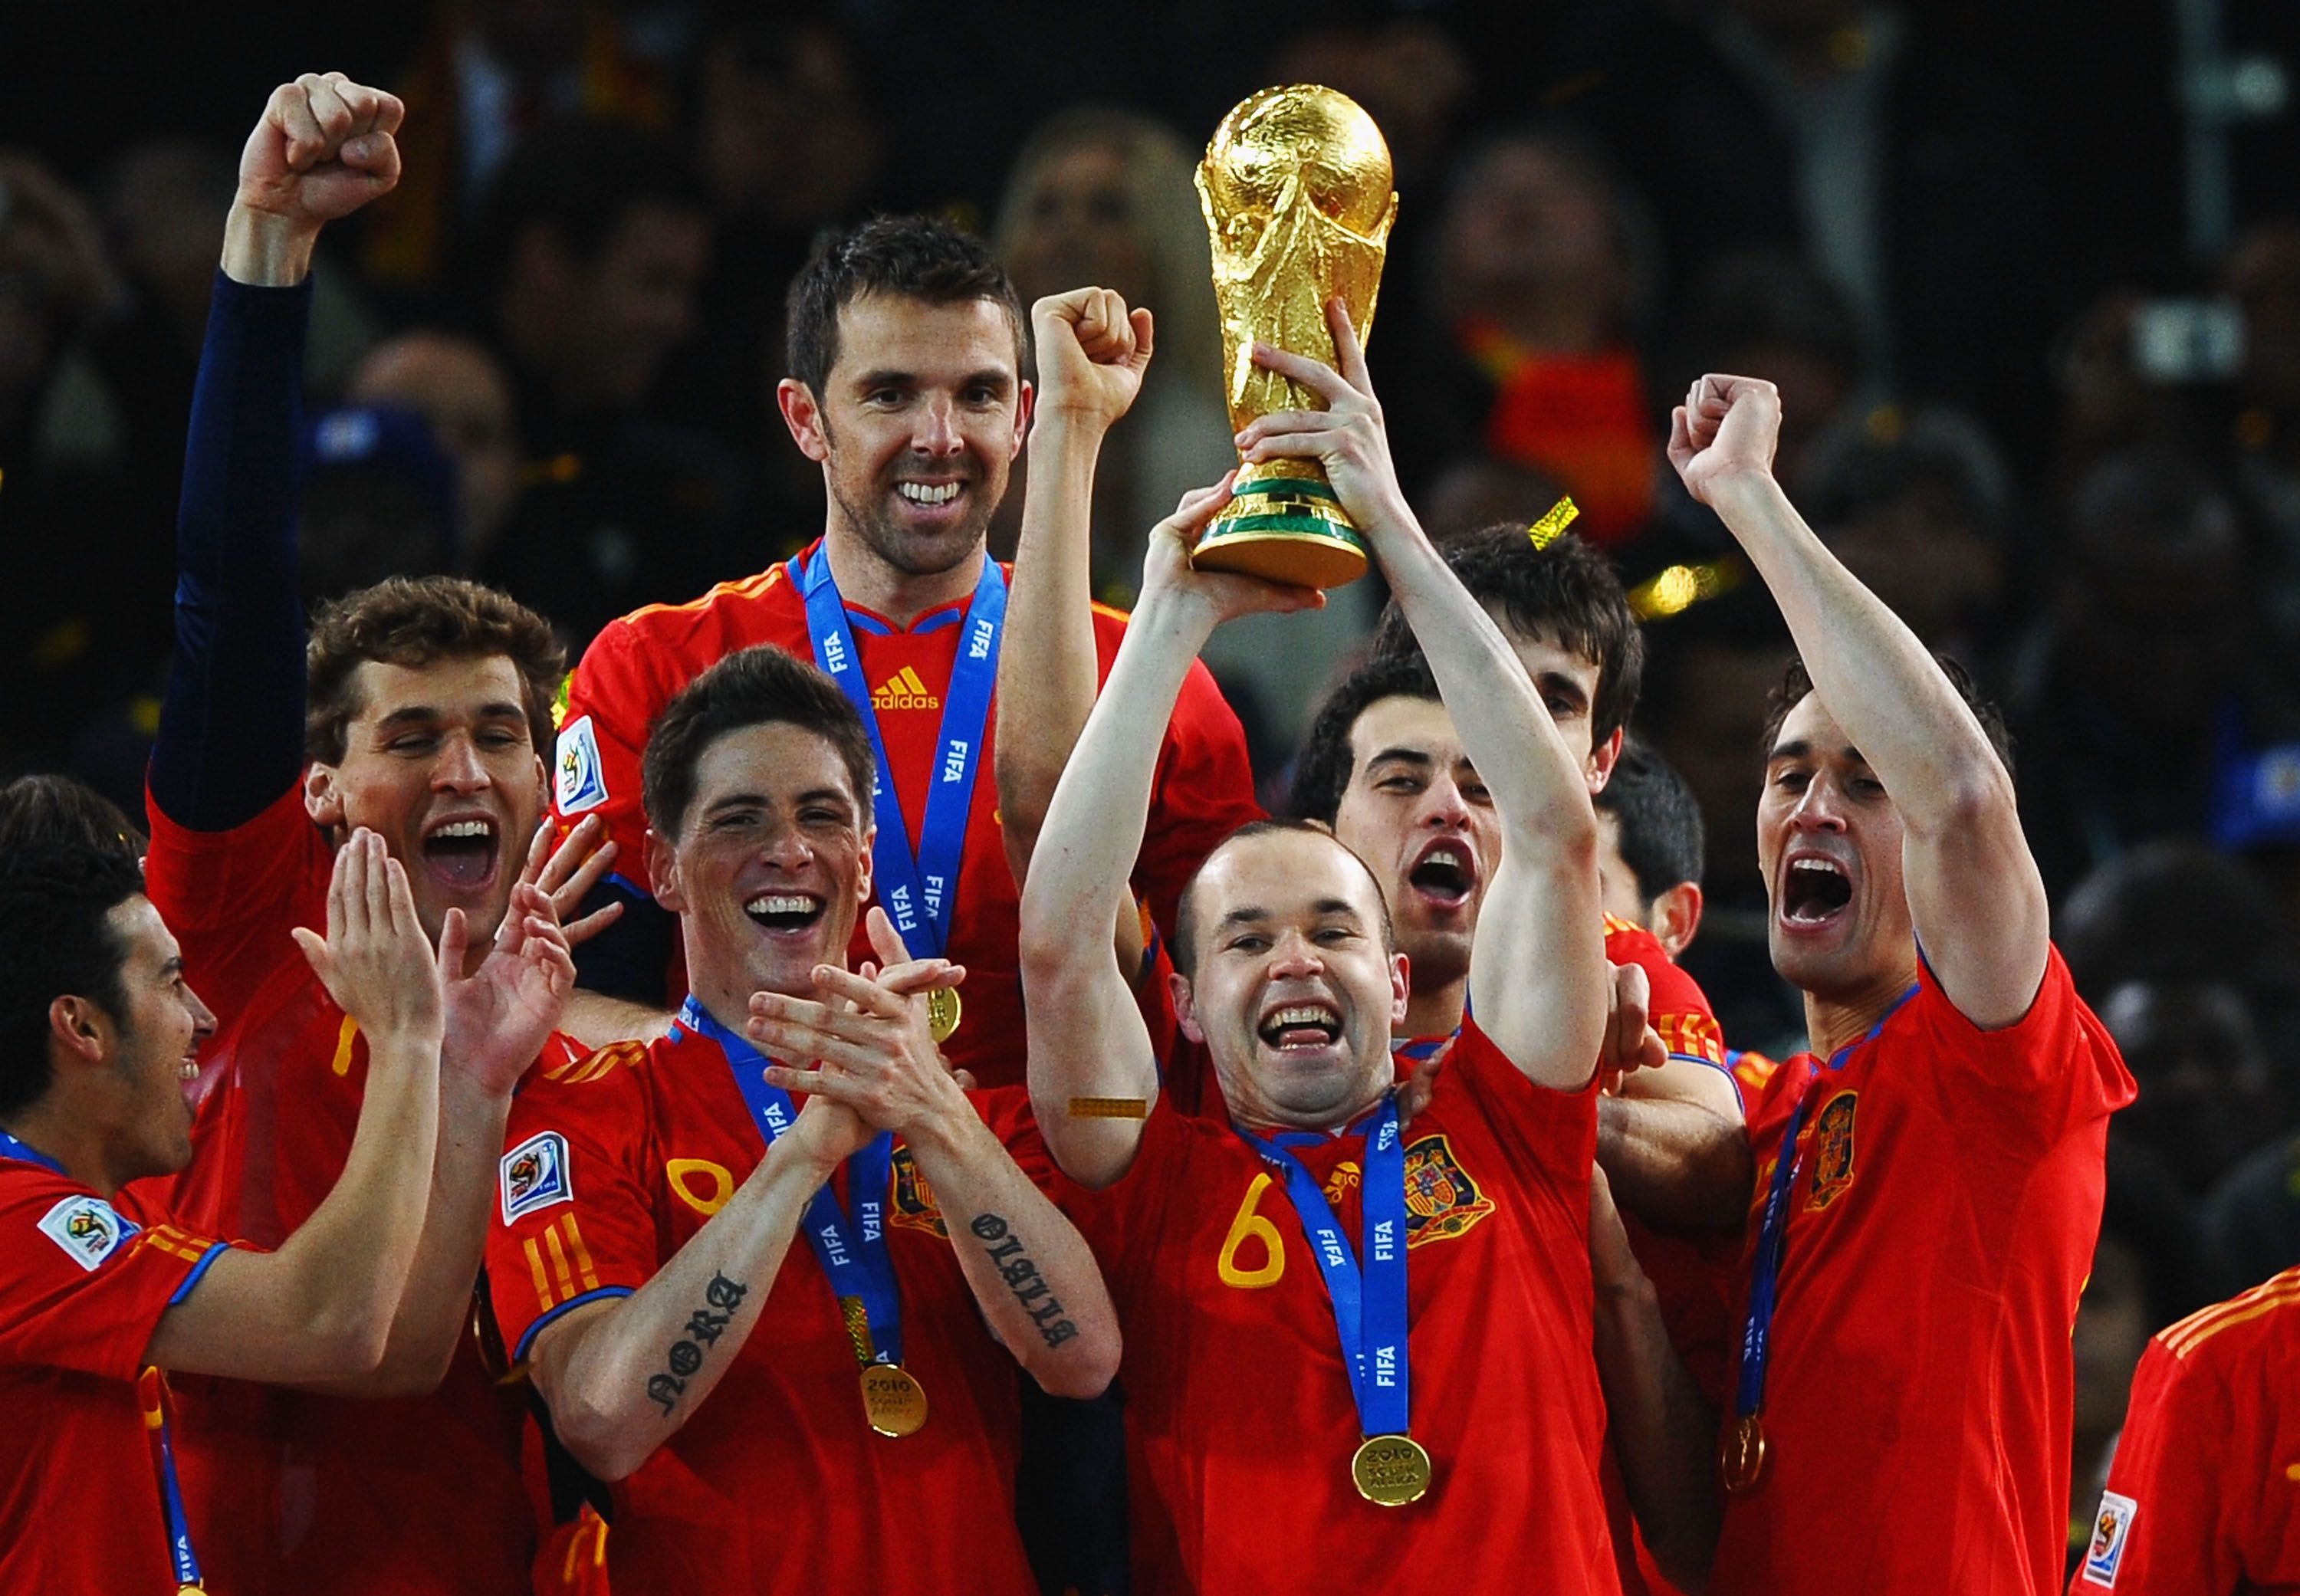 stamtavle mikrofon ildsted Qatar 2022: The story of how Spain became 2010 World Cup winners